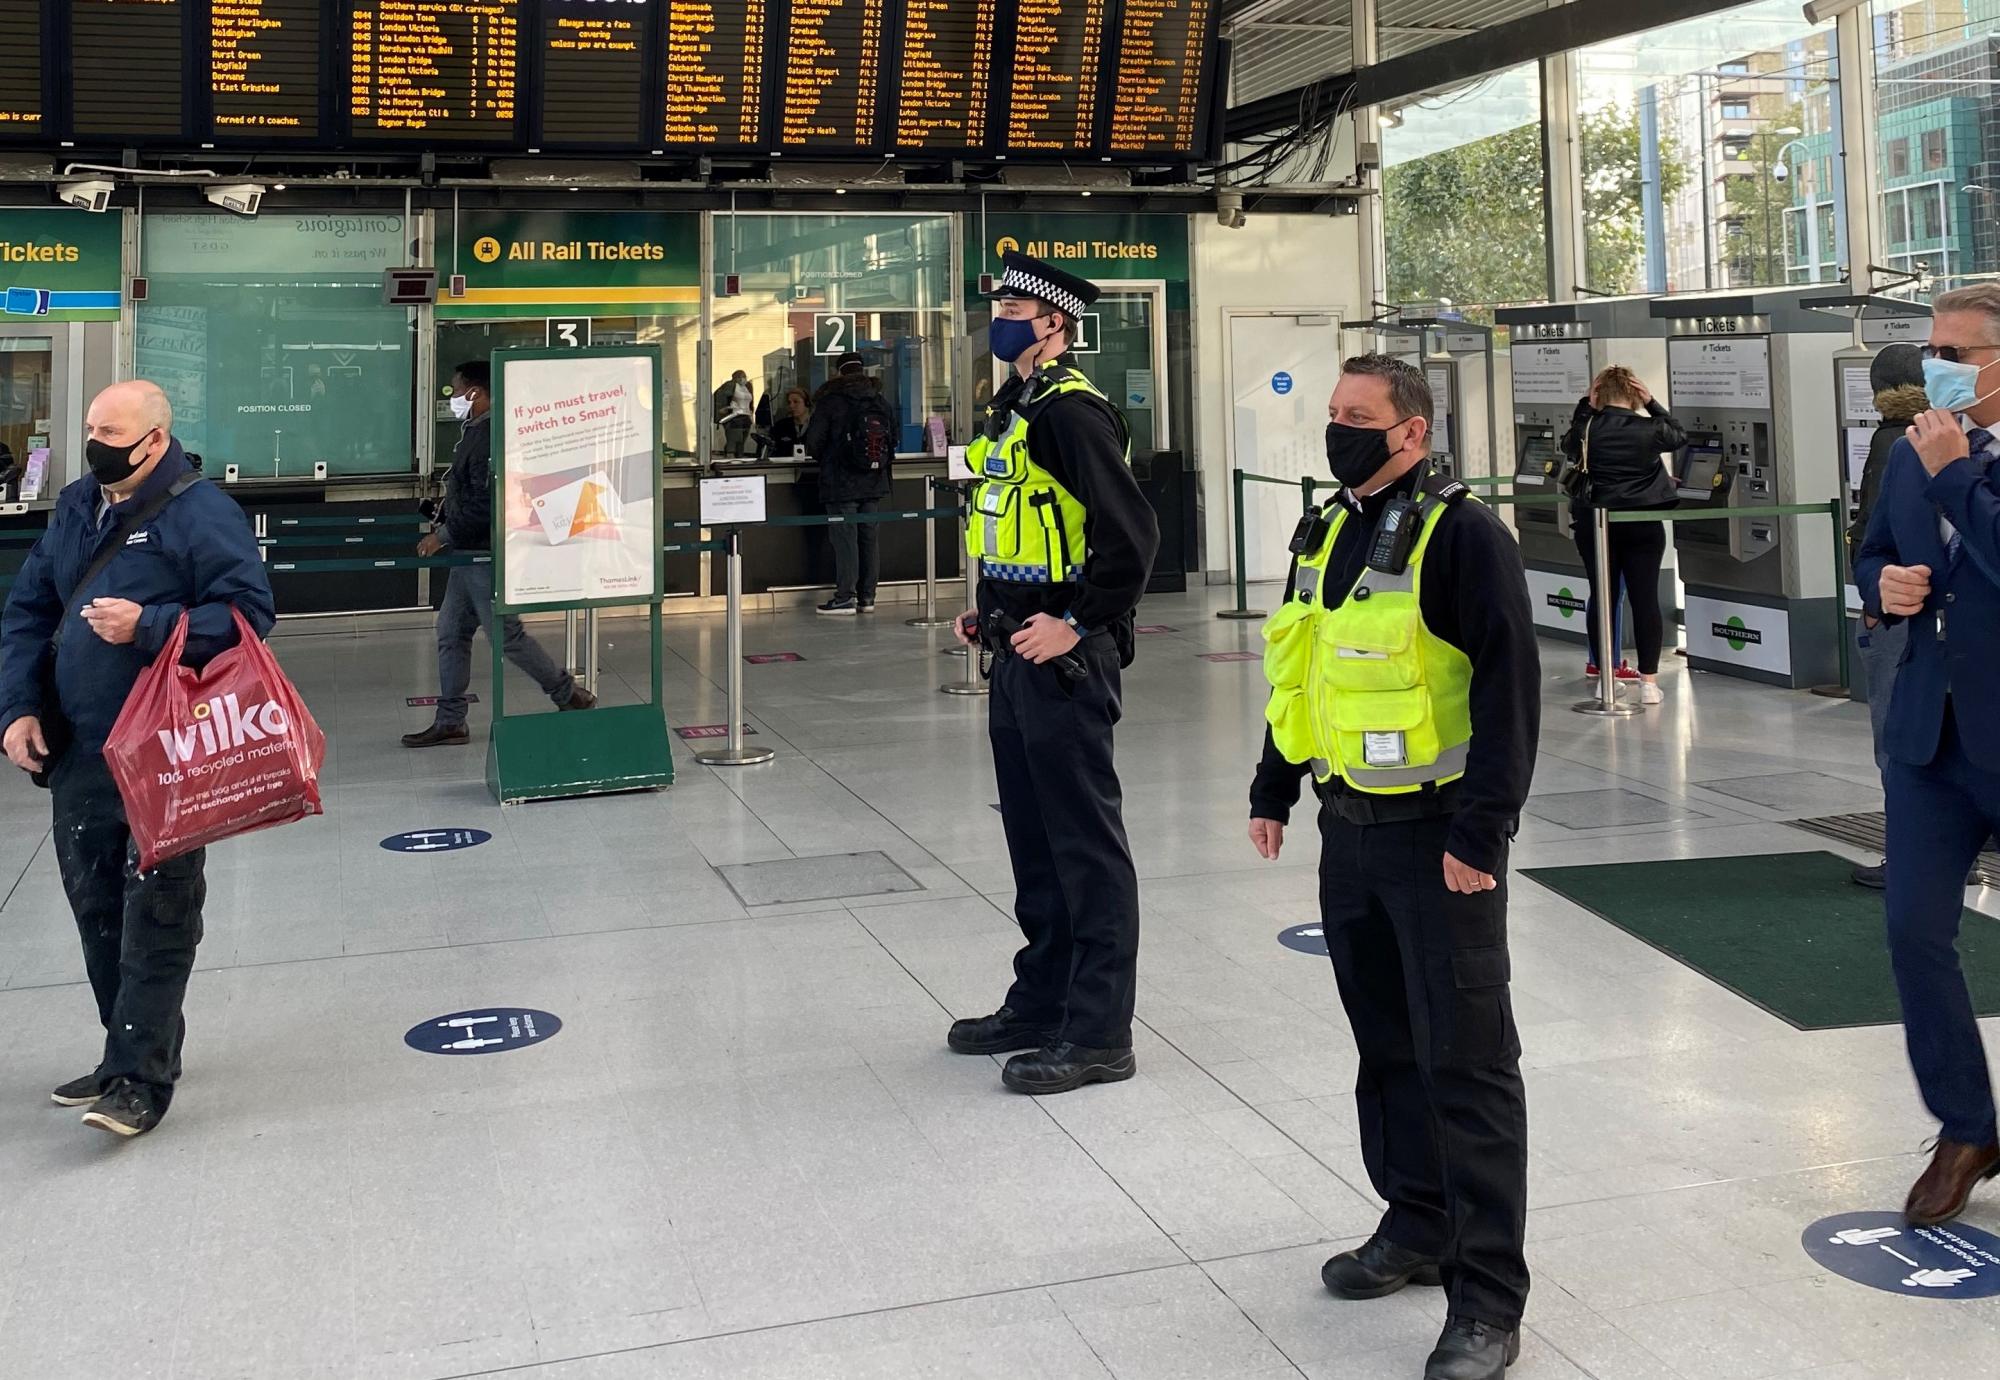 New pilot launches with BTP and London rail companies 